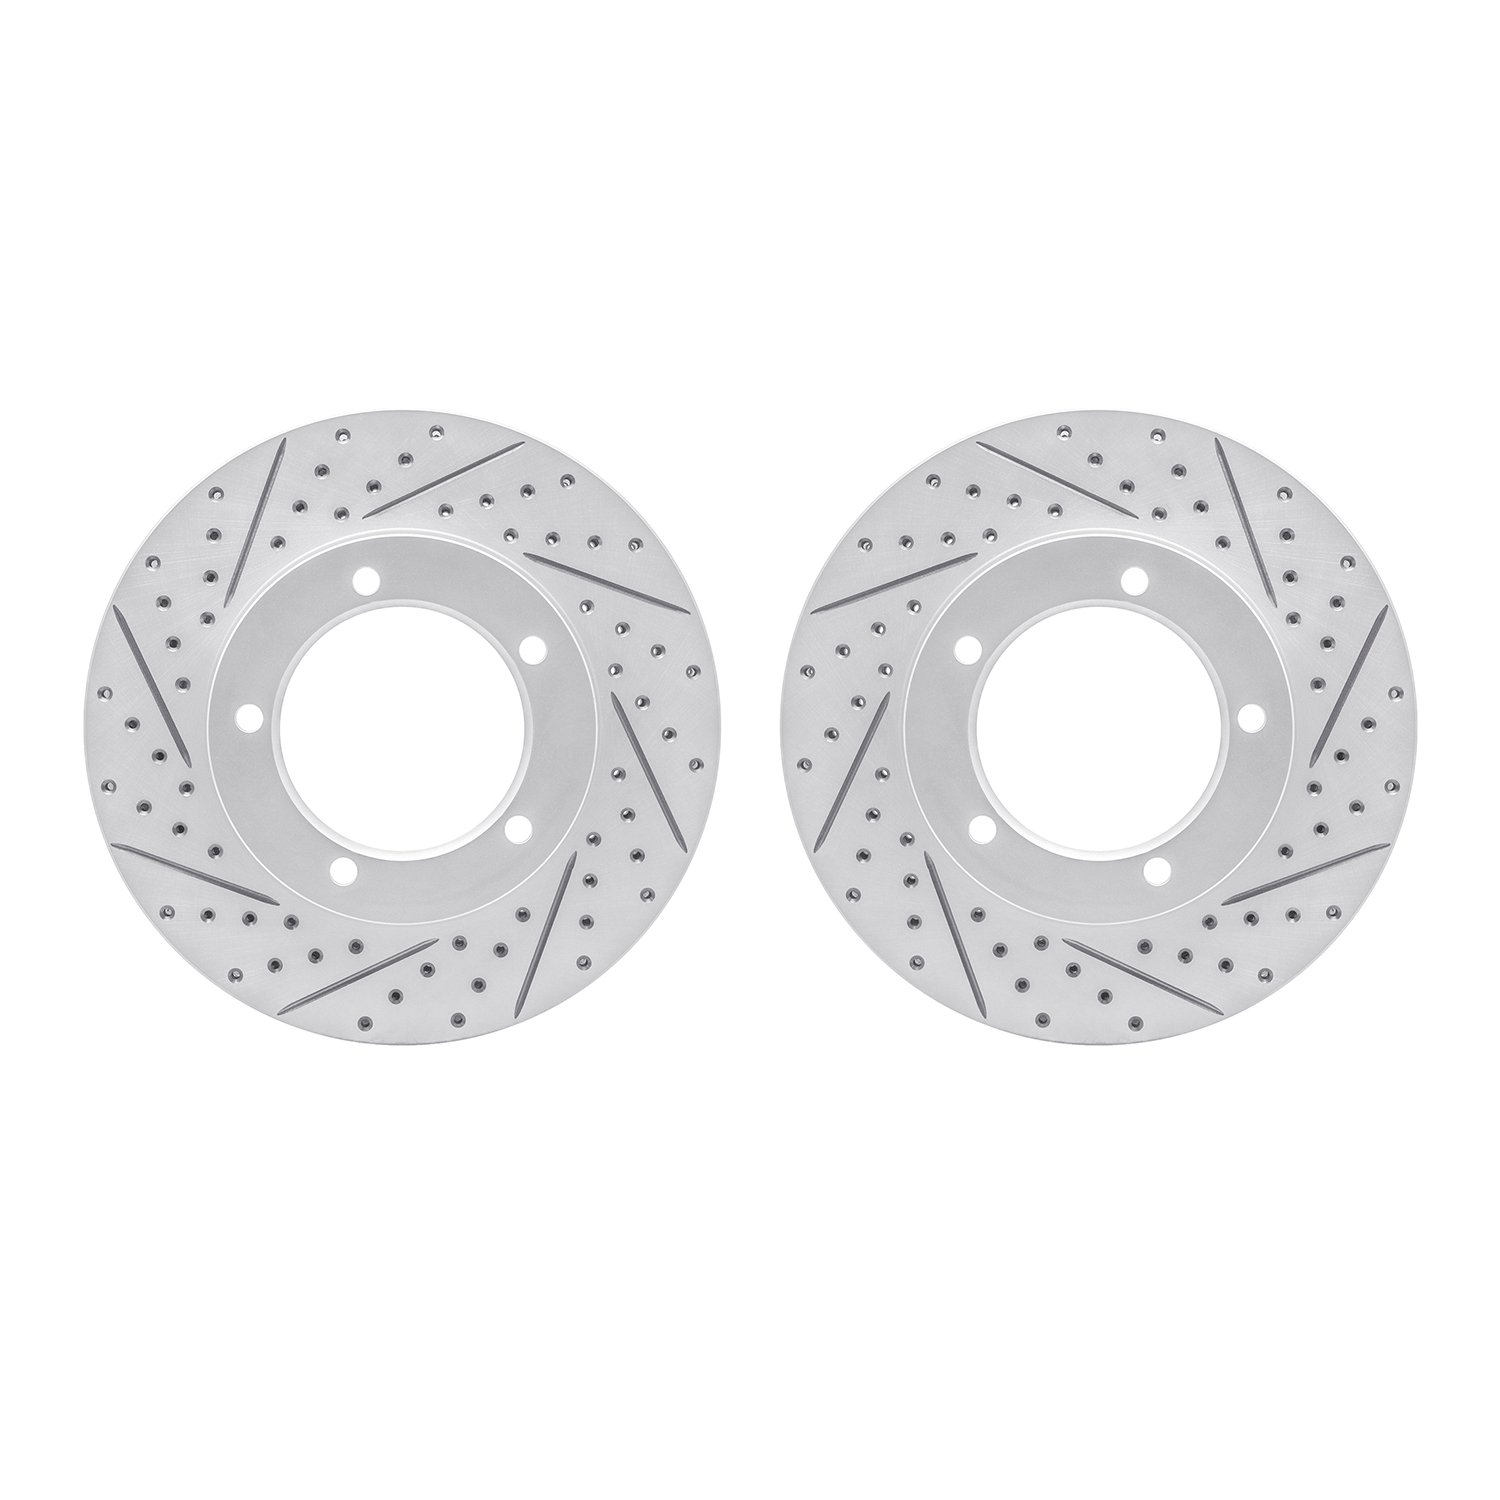 2002-76010 Geoperformance Drilled/Slotted Brake Rotors, 1998-2007 Lexus/Toyota/Scion, Position: Front